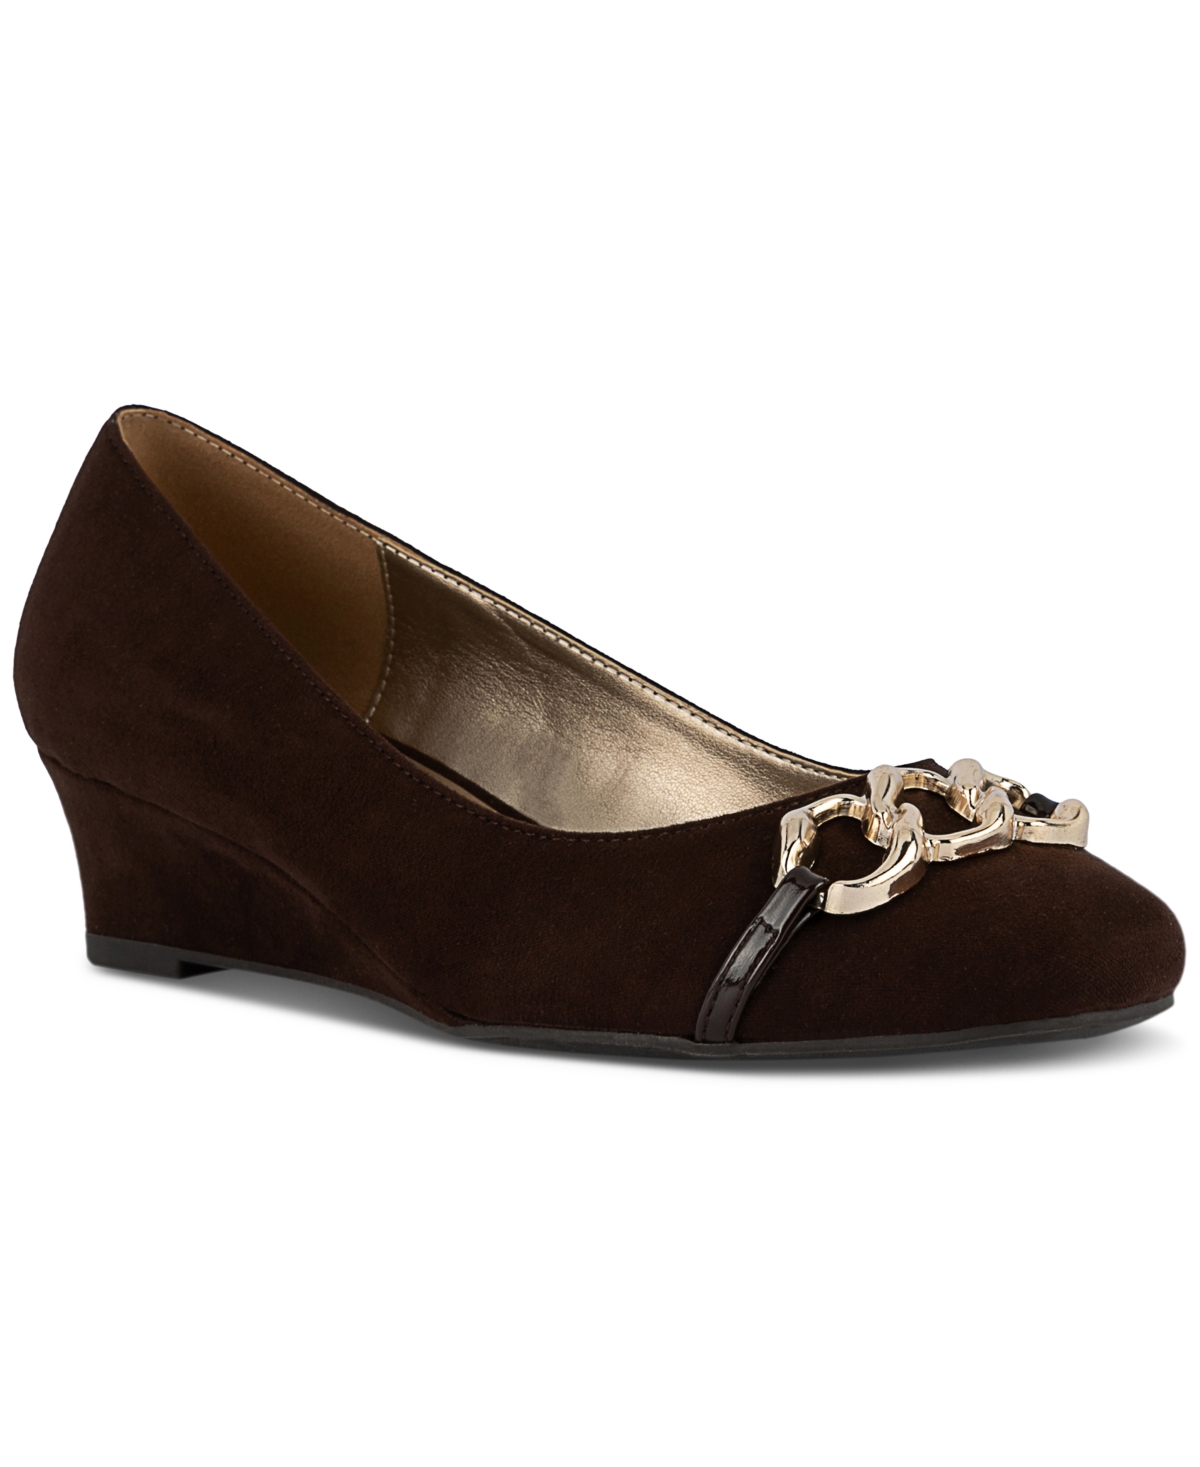 Kellyy Embelished Slip-On Wedge Pumps, Created for Macy's - Chocolate Micro